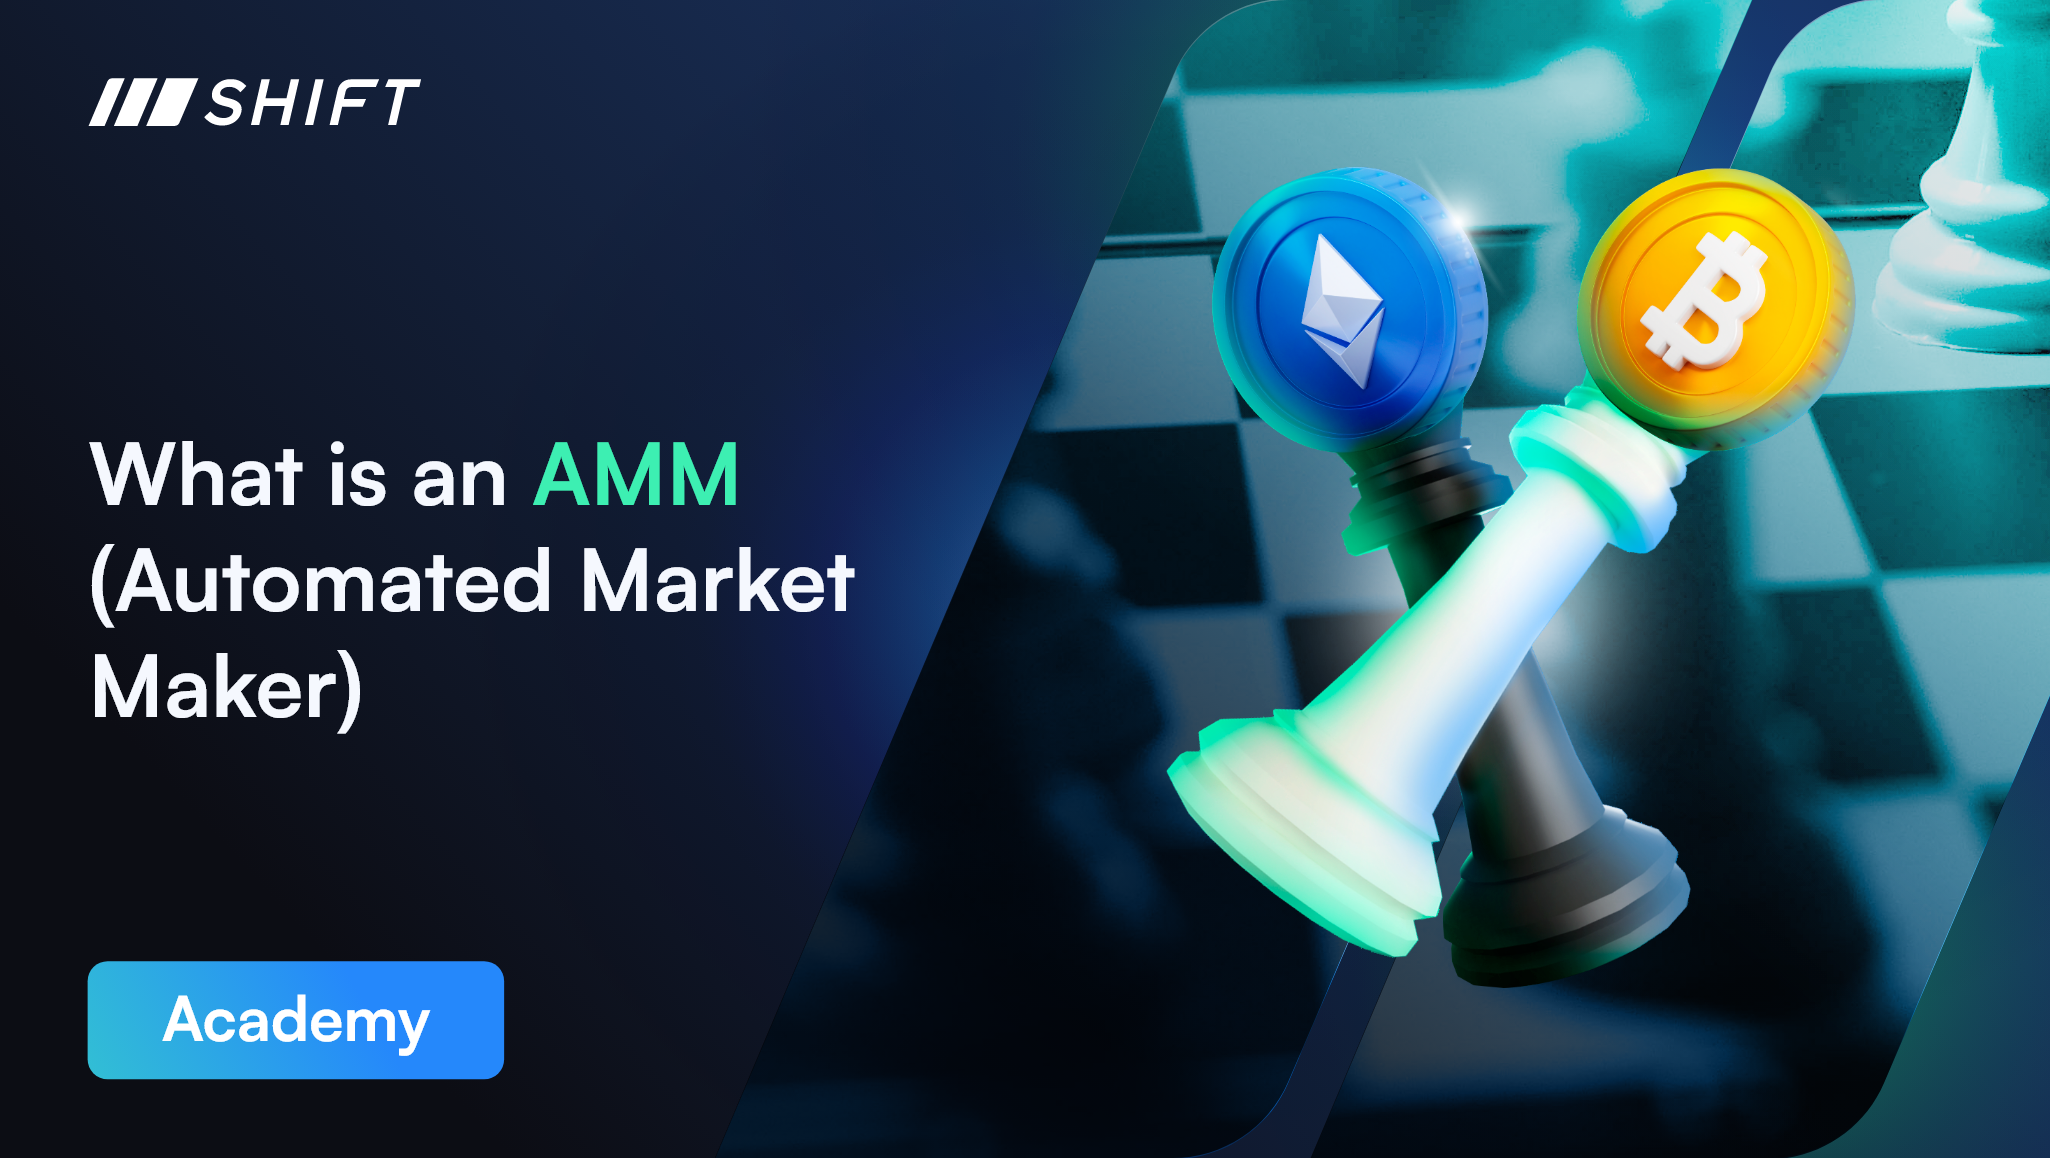 What is an AMM (Automated Market Maker)? They are the backbone of decentralized finance, providing liquidity and stability to crypto pairs of all types.